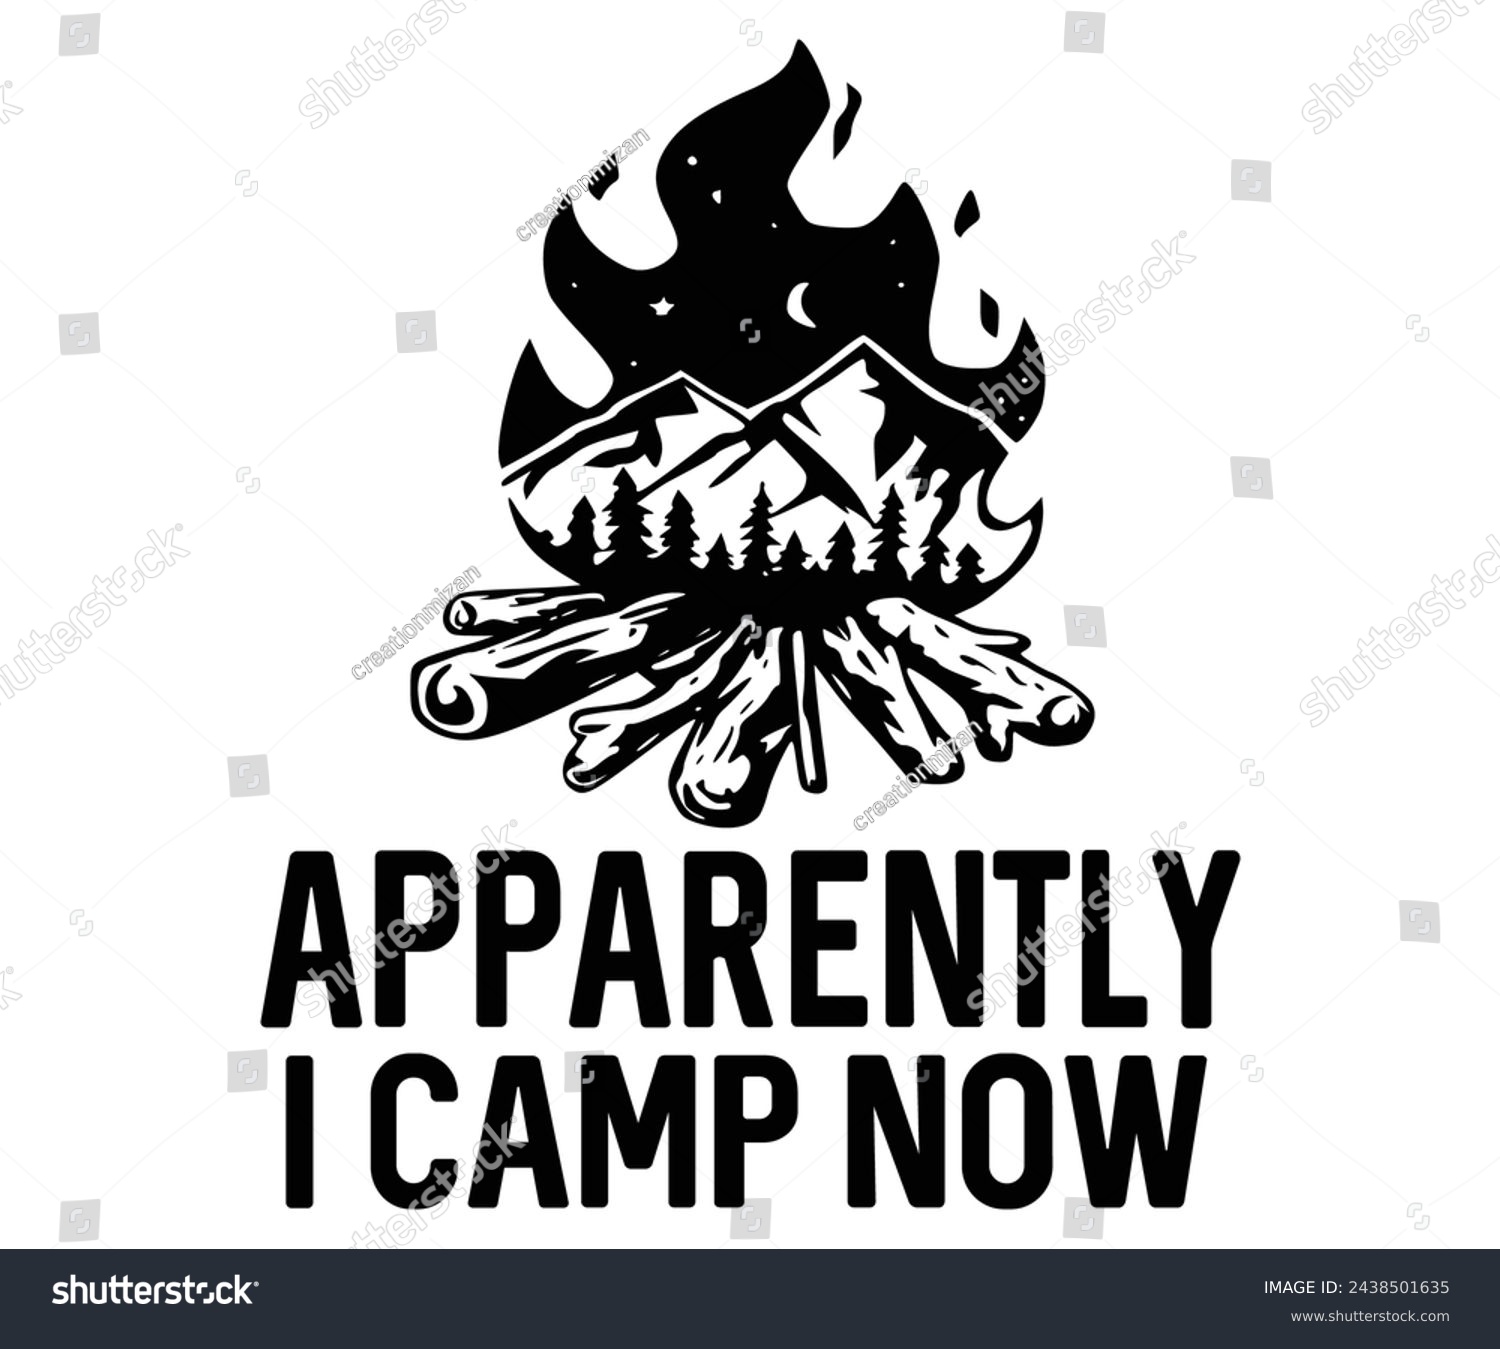 SVG of Apparently I Camp Now Svg,Camping Svg,Hiking,Funny Camping,Adventure,Summer Camp,Happy Camper,Camp Life,Camp Saying,Camping Shirt svg